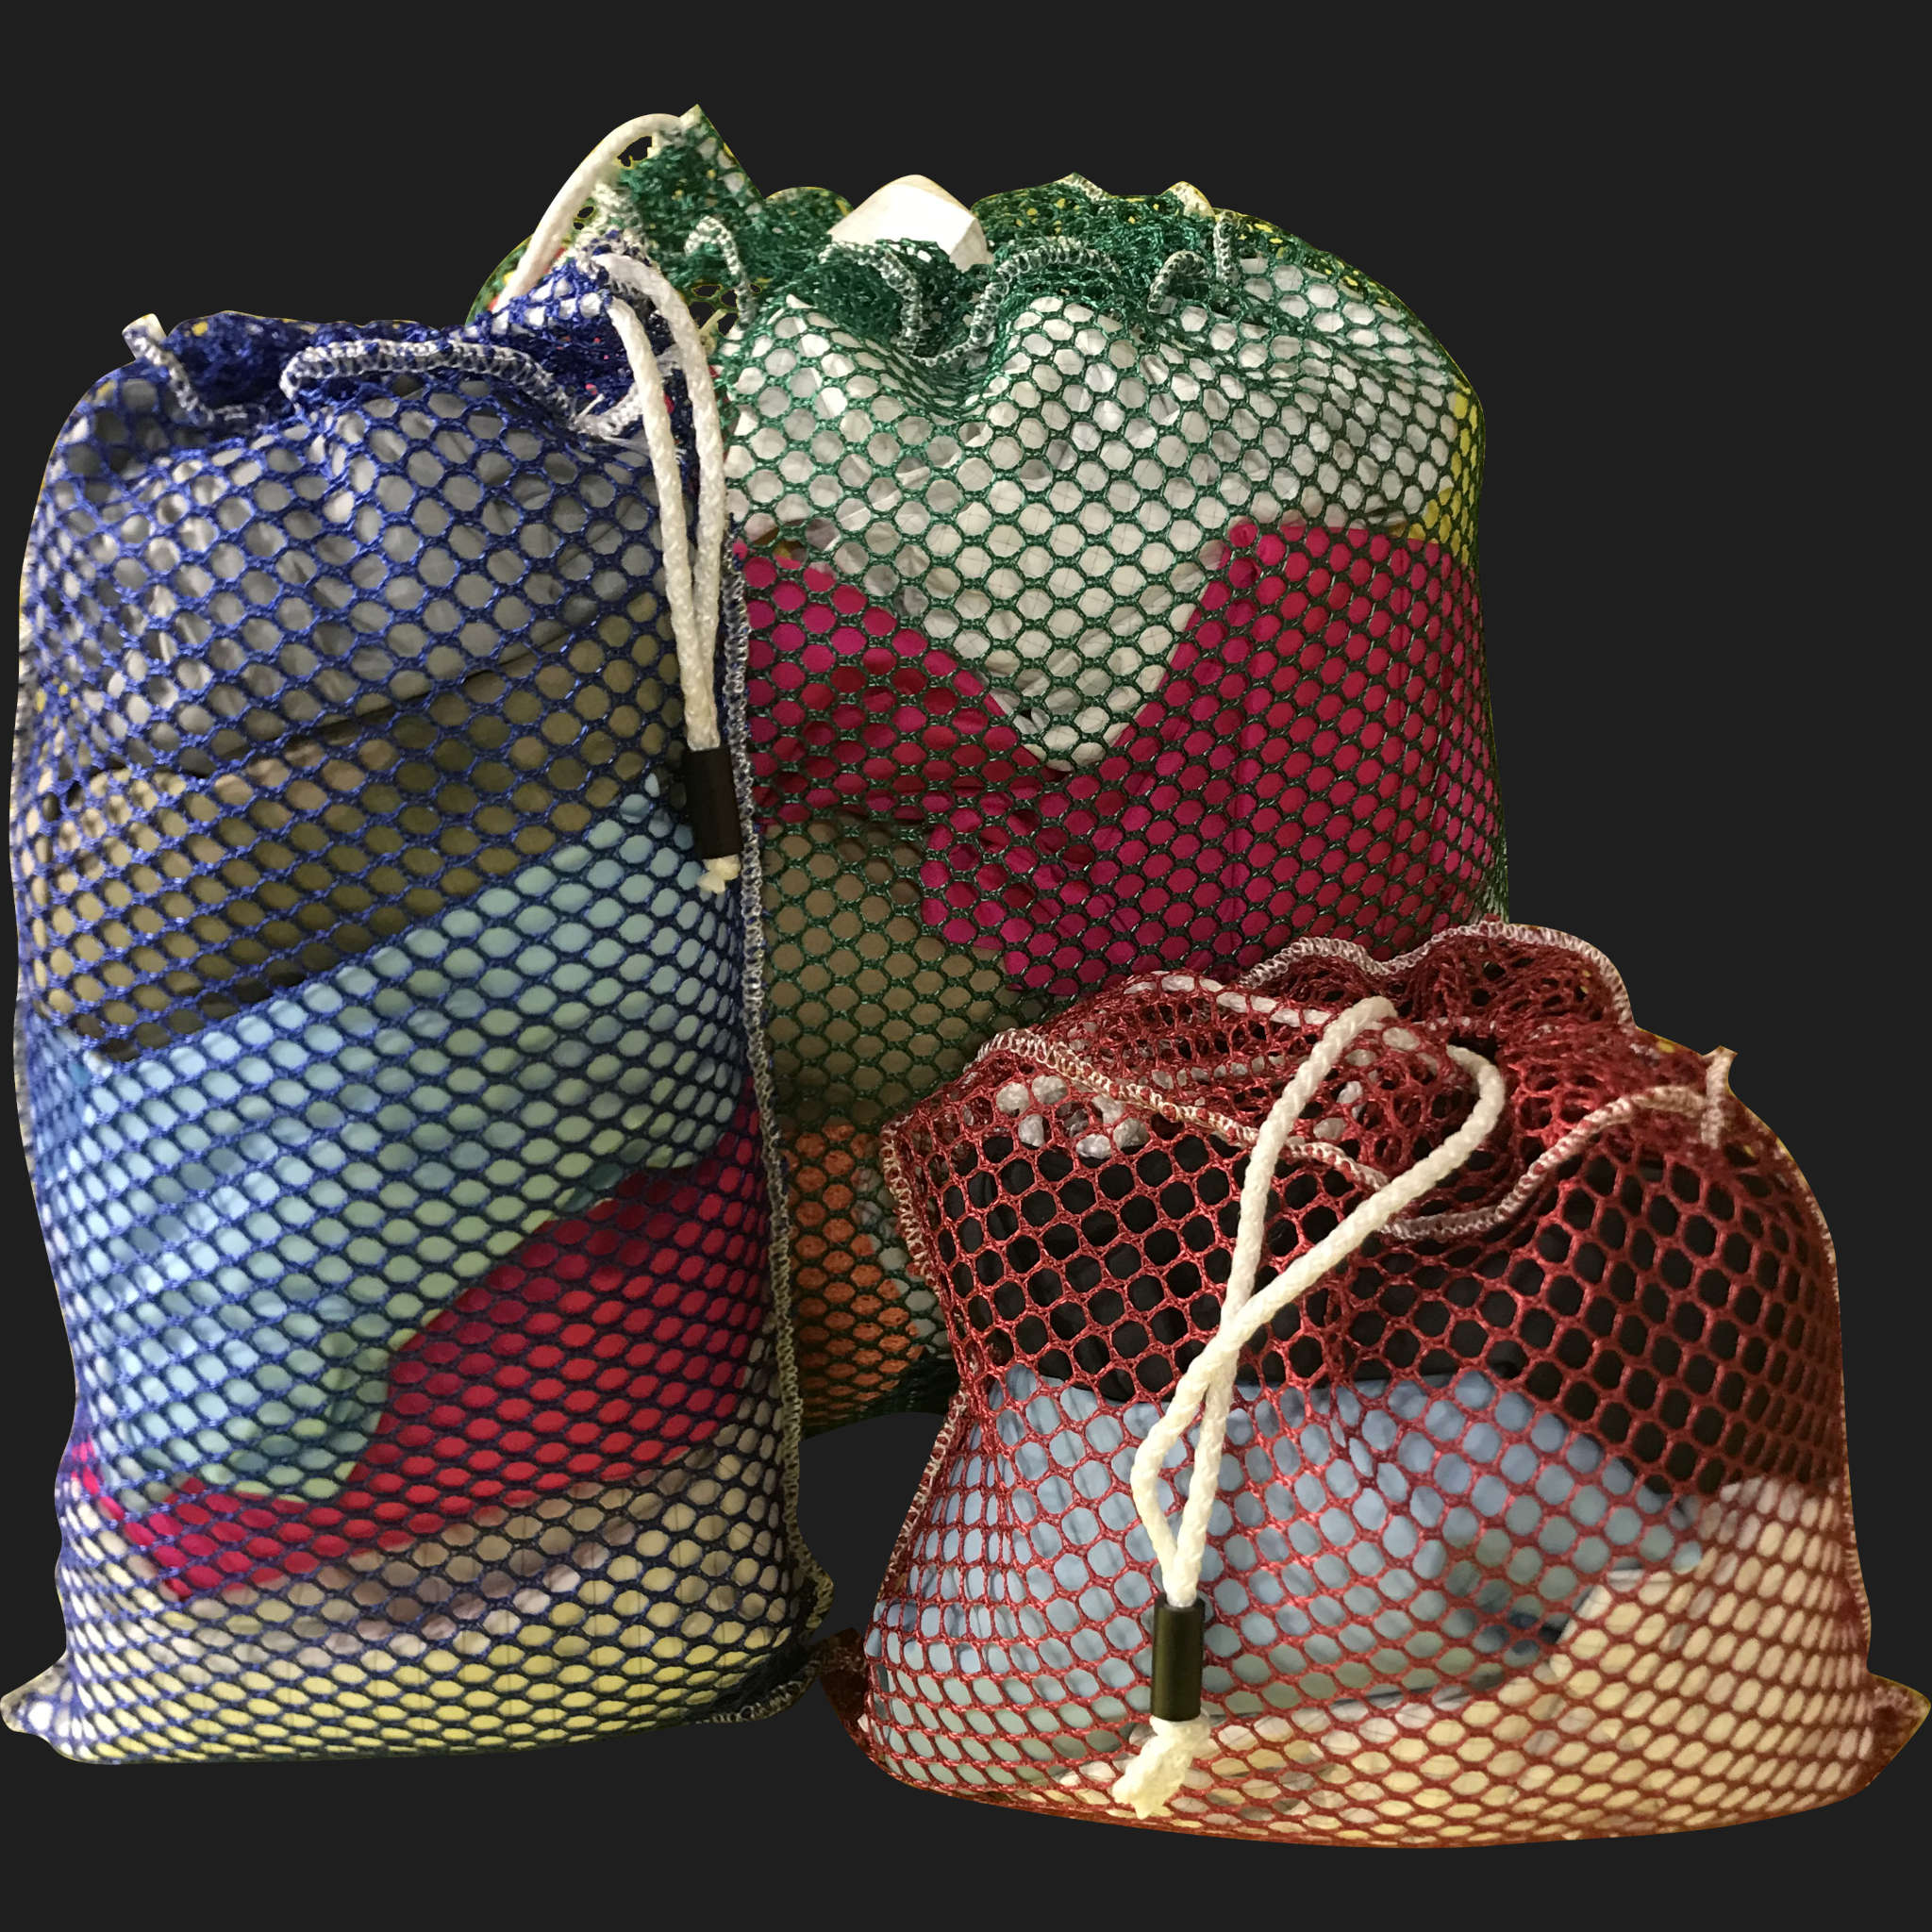 14" x 32" Customized Mesh-Net-Laundry Bags Heavy Duty with Cord and barrellock closure